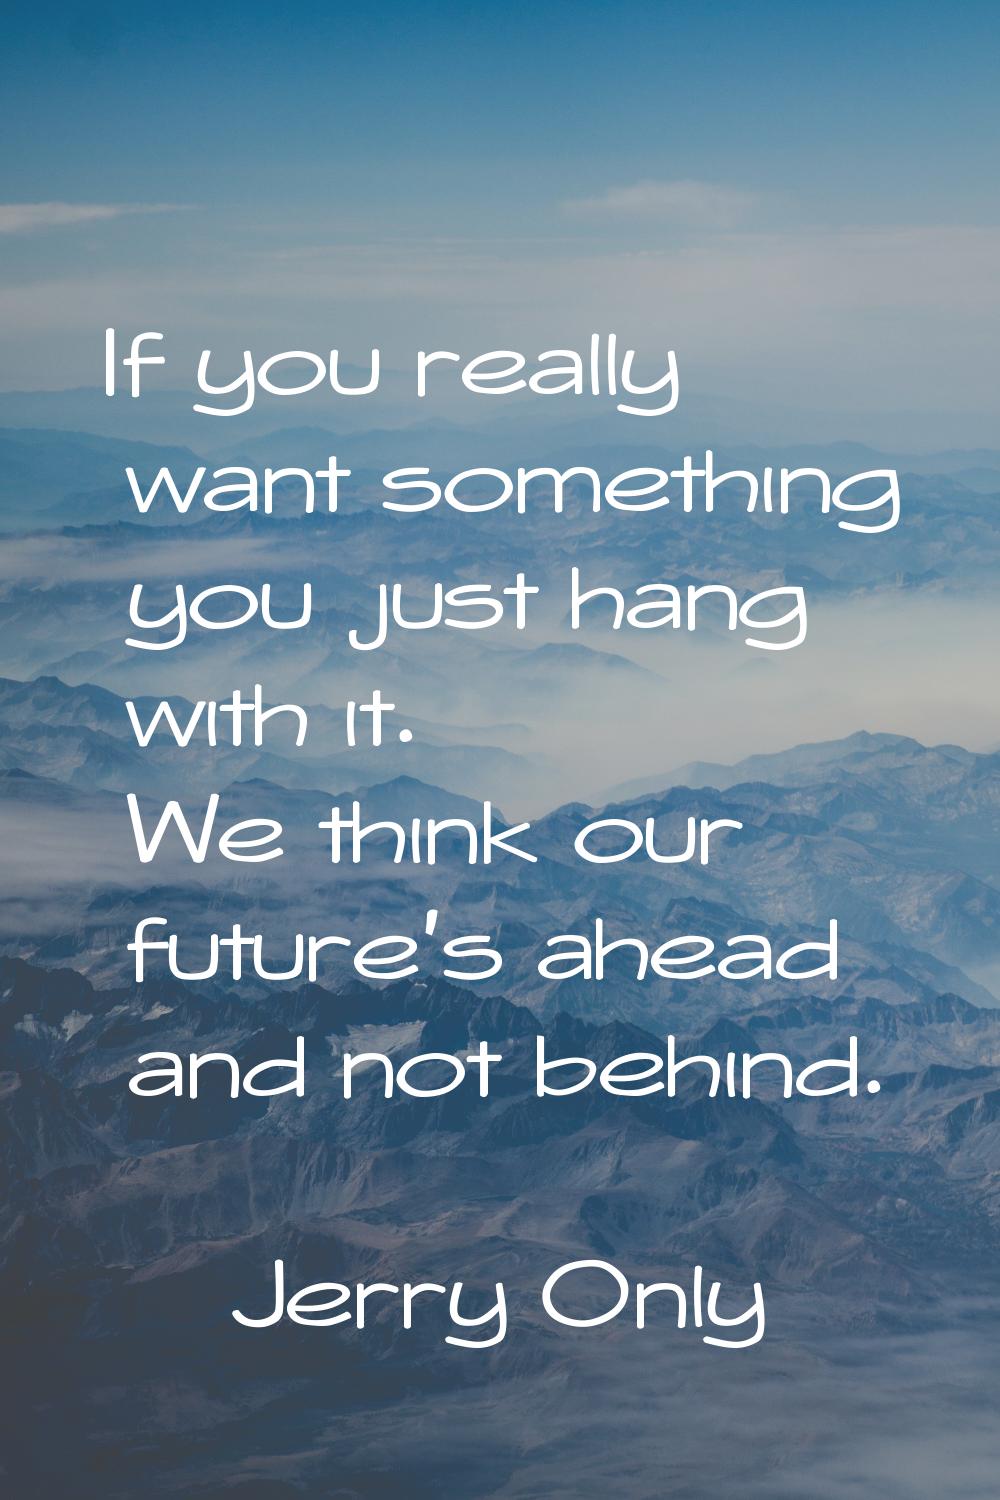 If you really want something you just hang with it. We think our future's ahead and not behind.